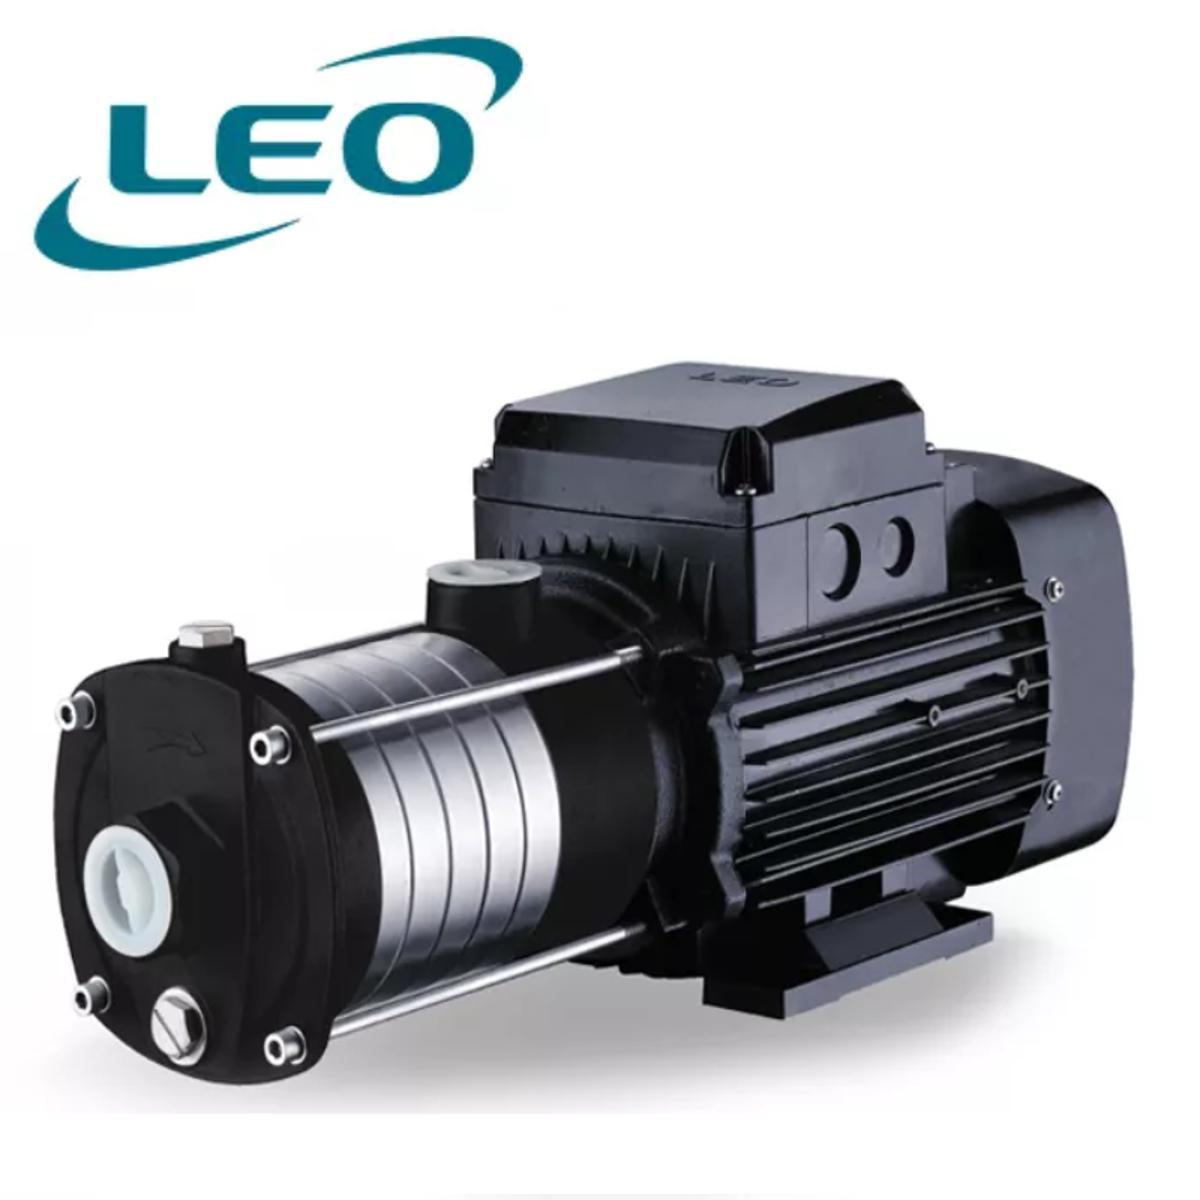 LEO - ECHM10-50 - 2200W - 3.0 HP -  Stainless Steel Multistage Centrifugal Pump- 220V~240V SINGLE PHASE- SIZE:- 1 1-2" X 1 1-4"- European STANDARD